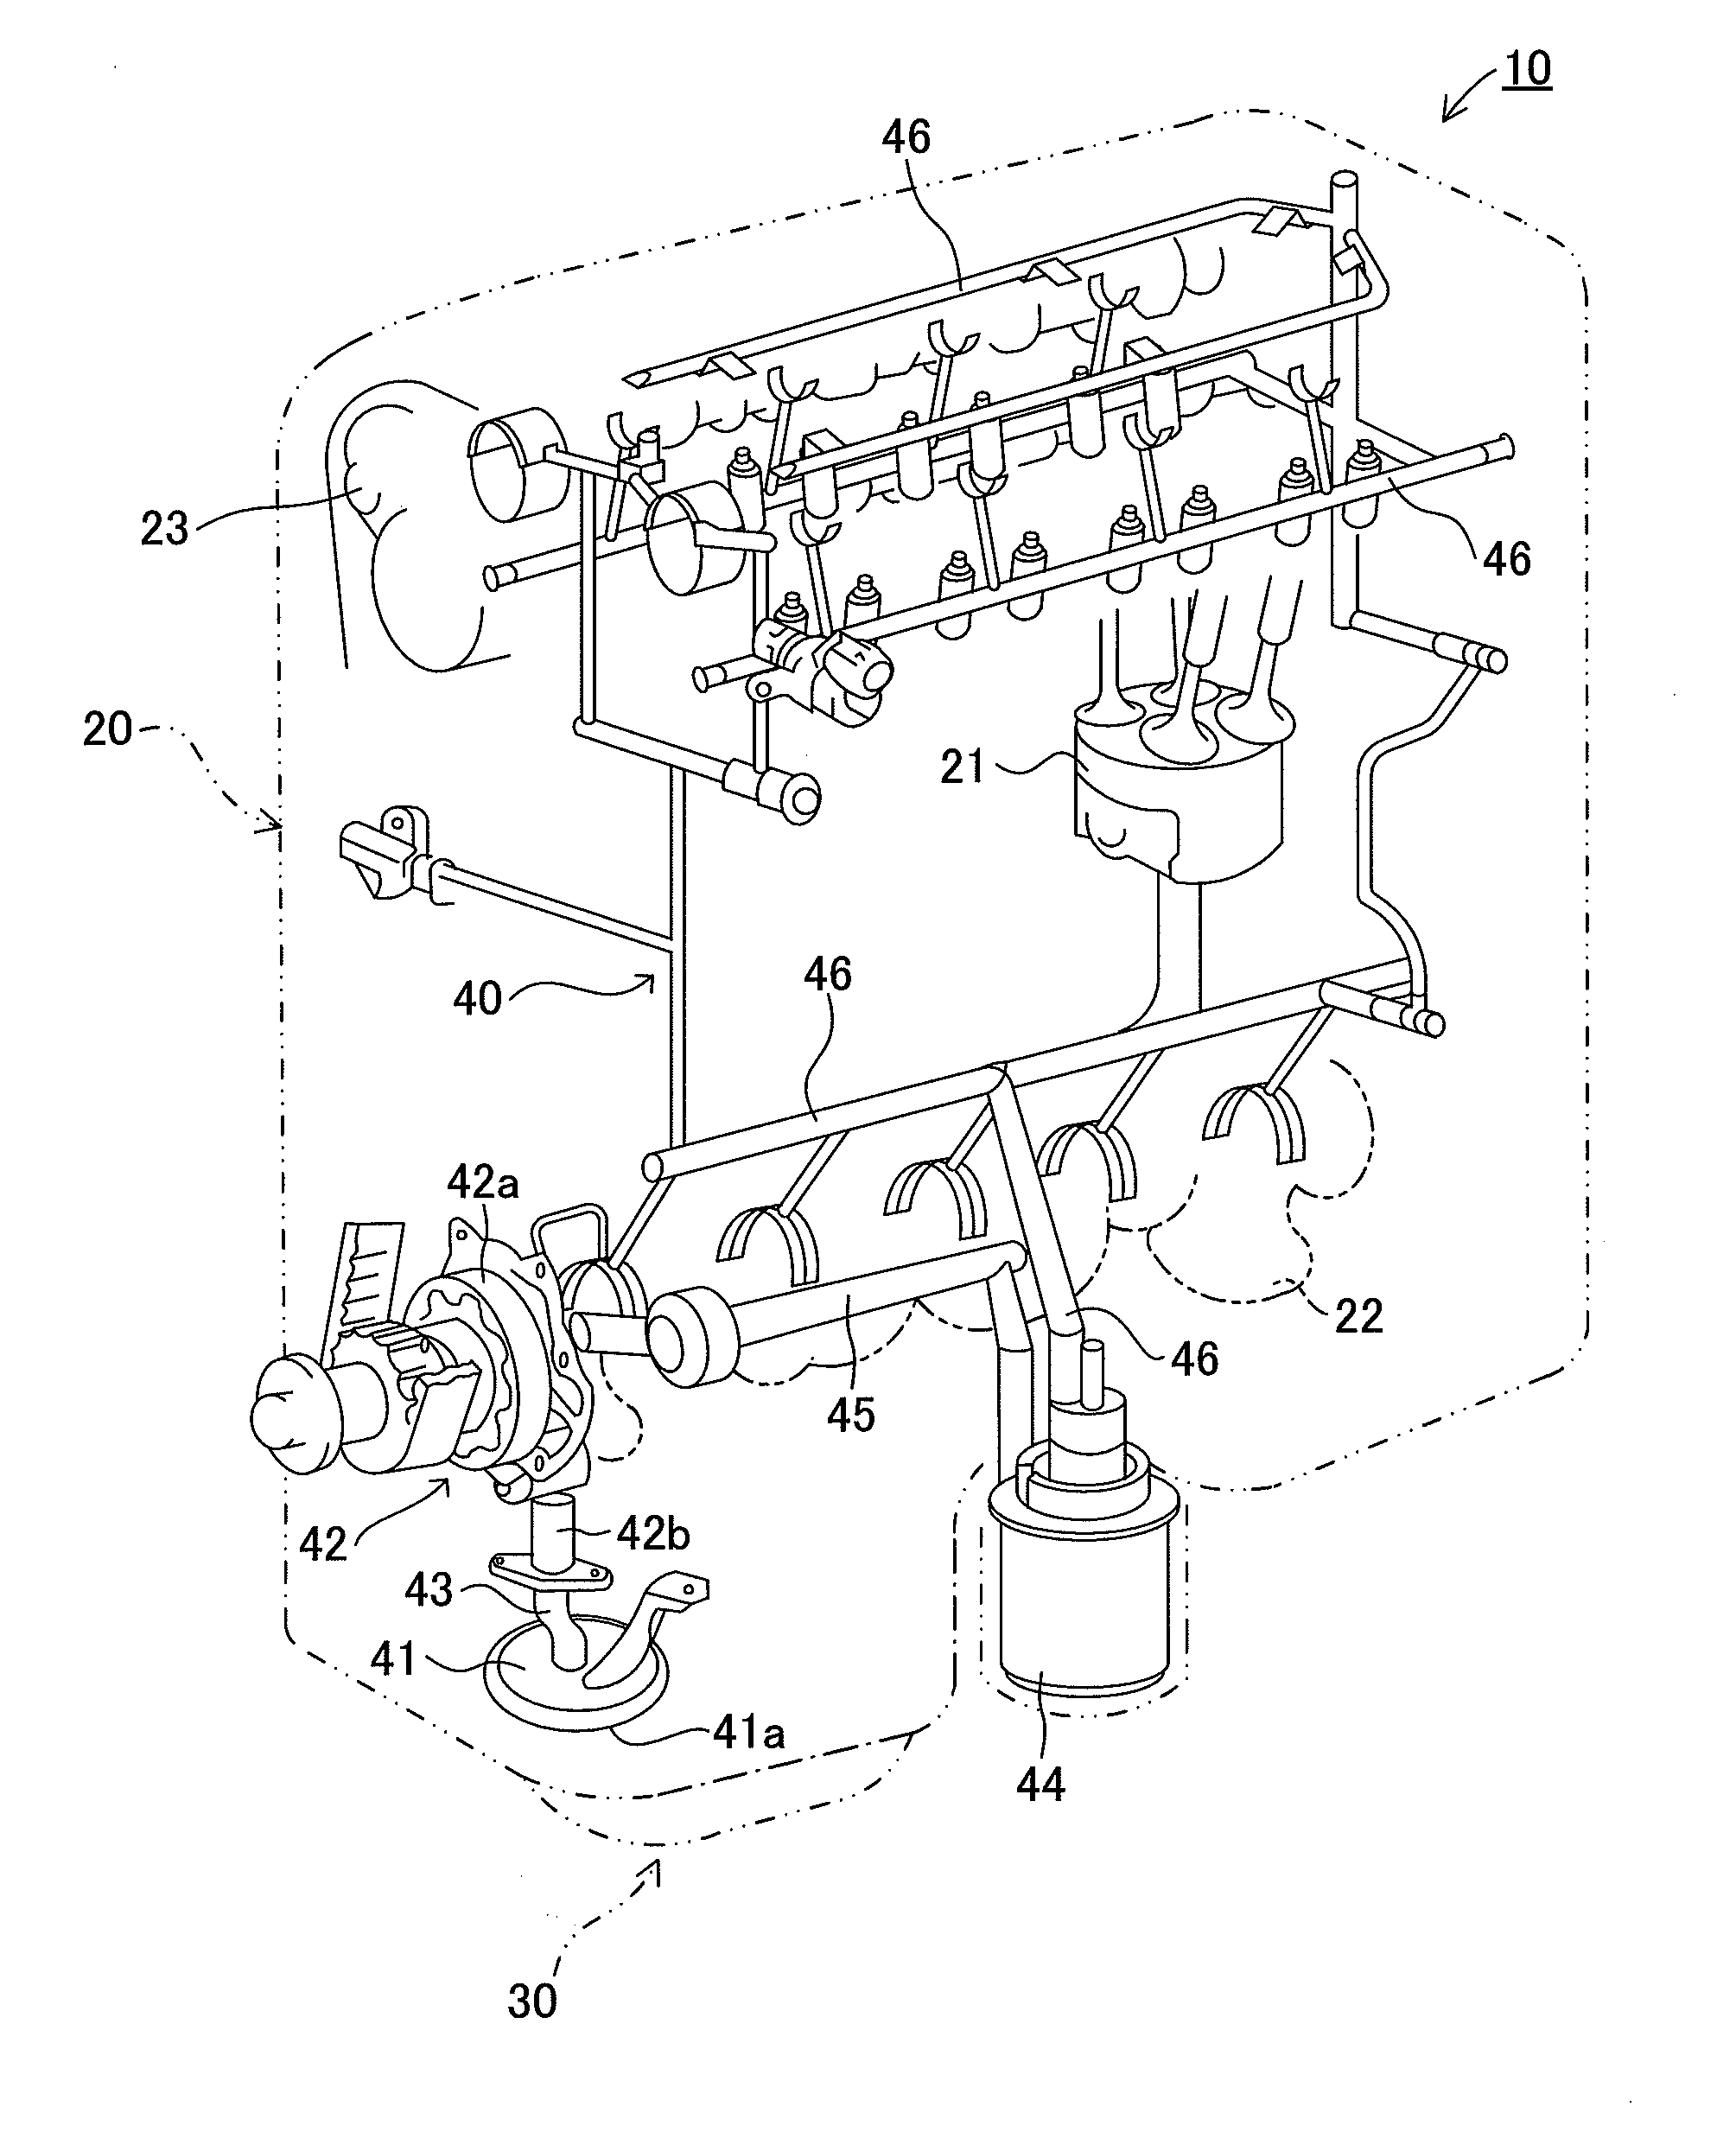 Lubrication device and oil pan